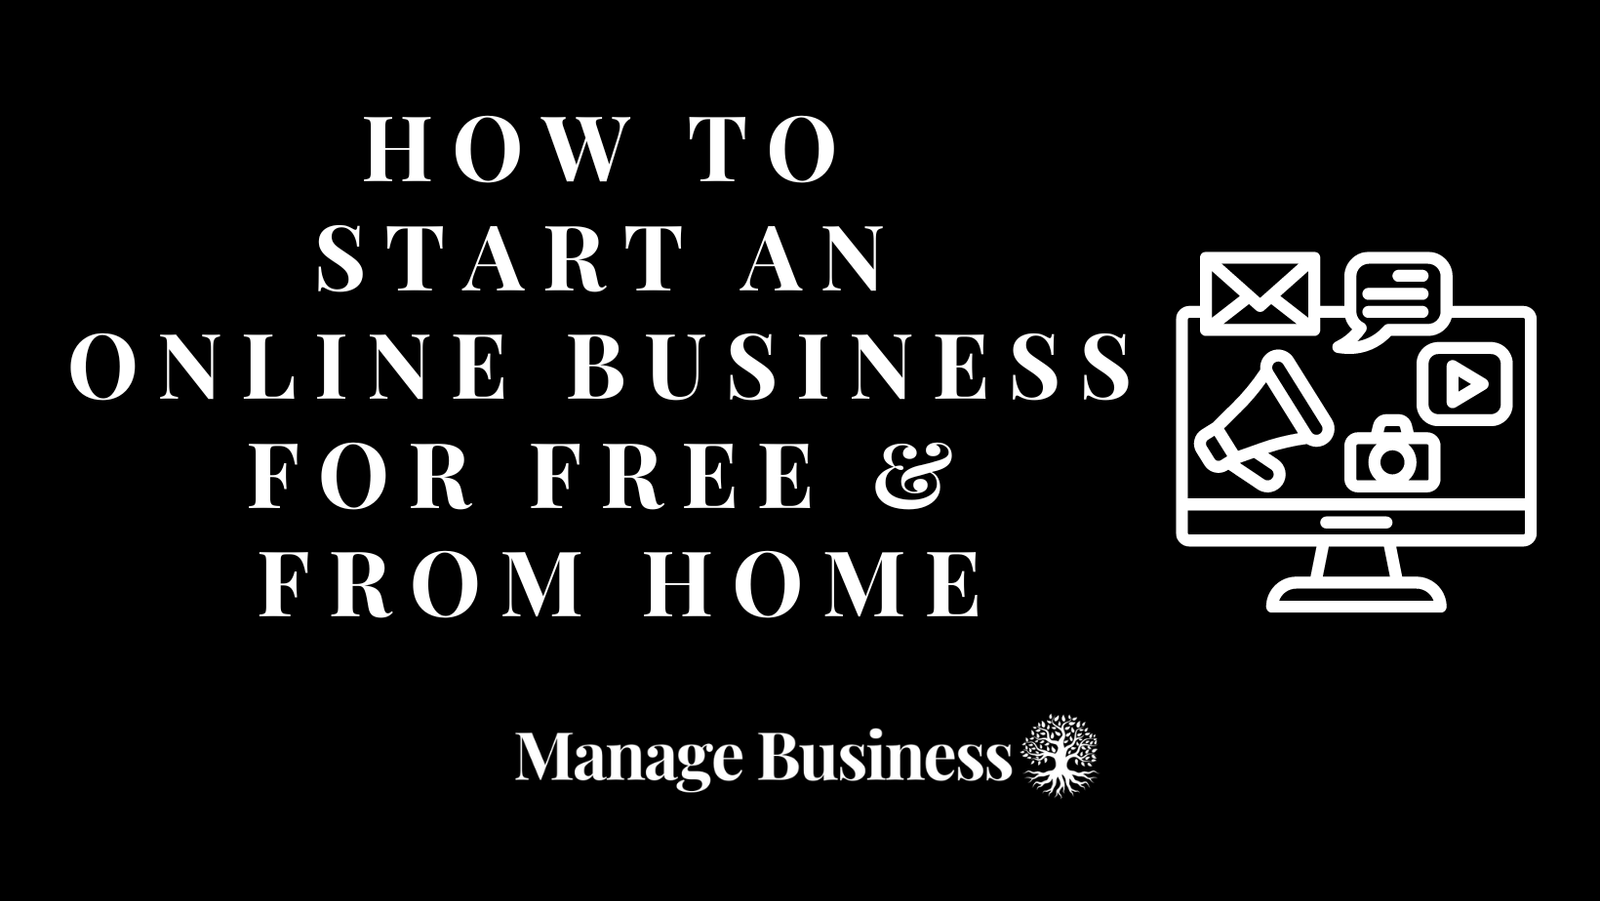 How to start an online business for free & from home